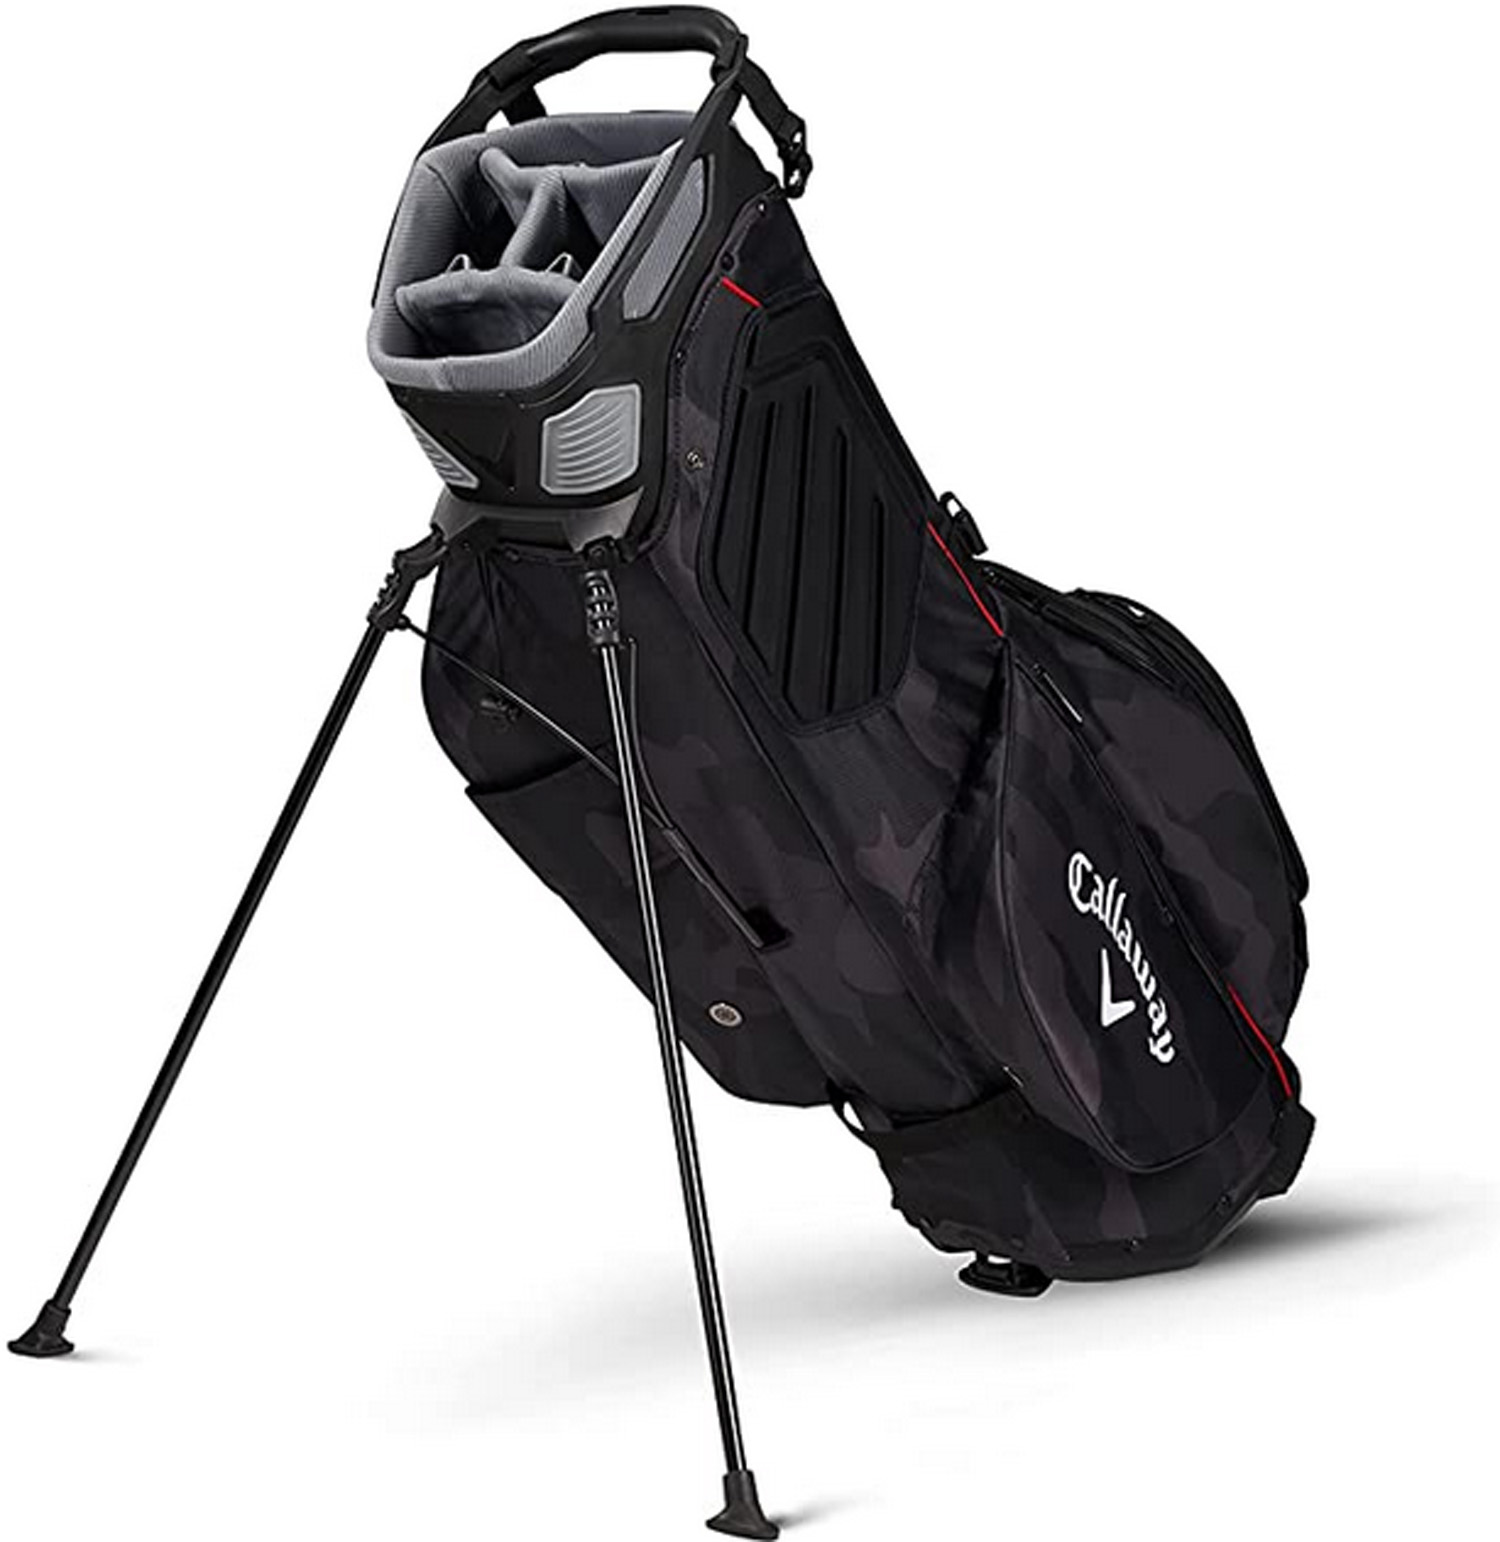 NEW Callaway Golf Fairway+ Plus Stand / Carry Bag - Black Camo - image 3 of 3